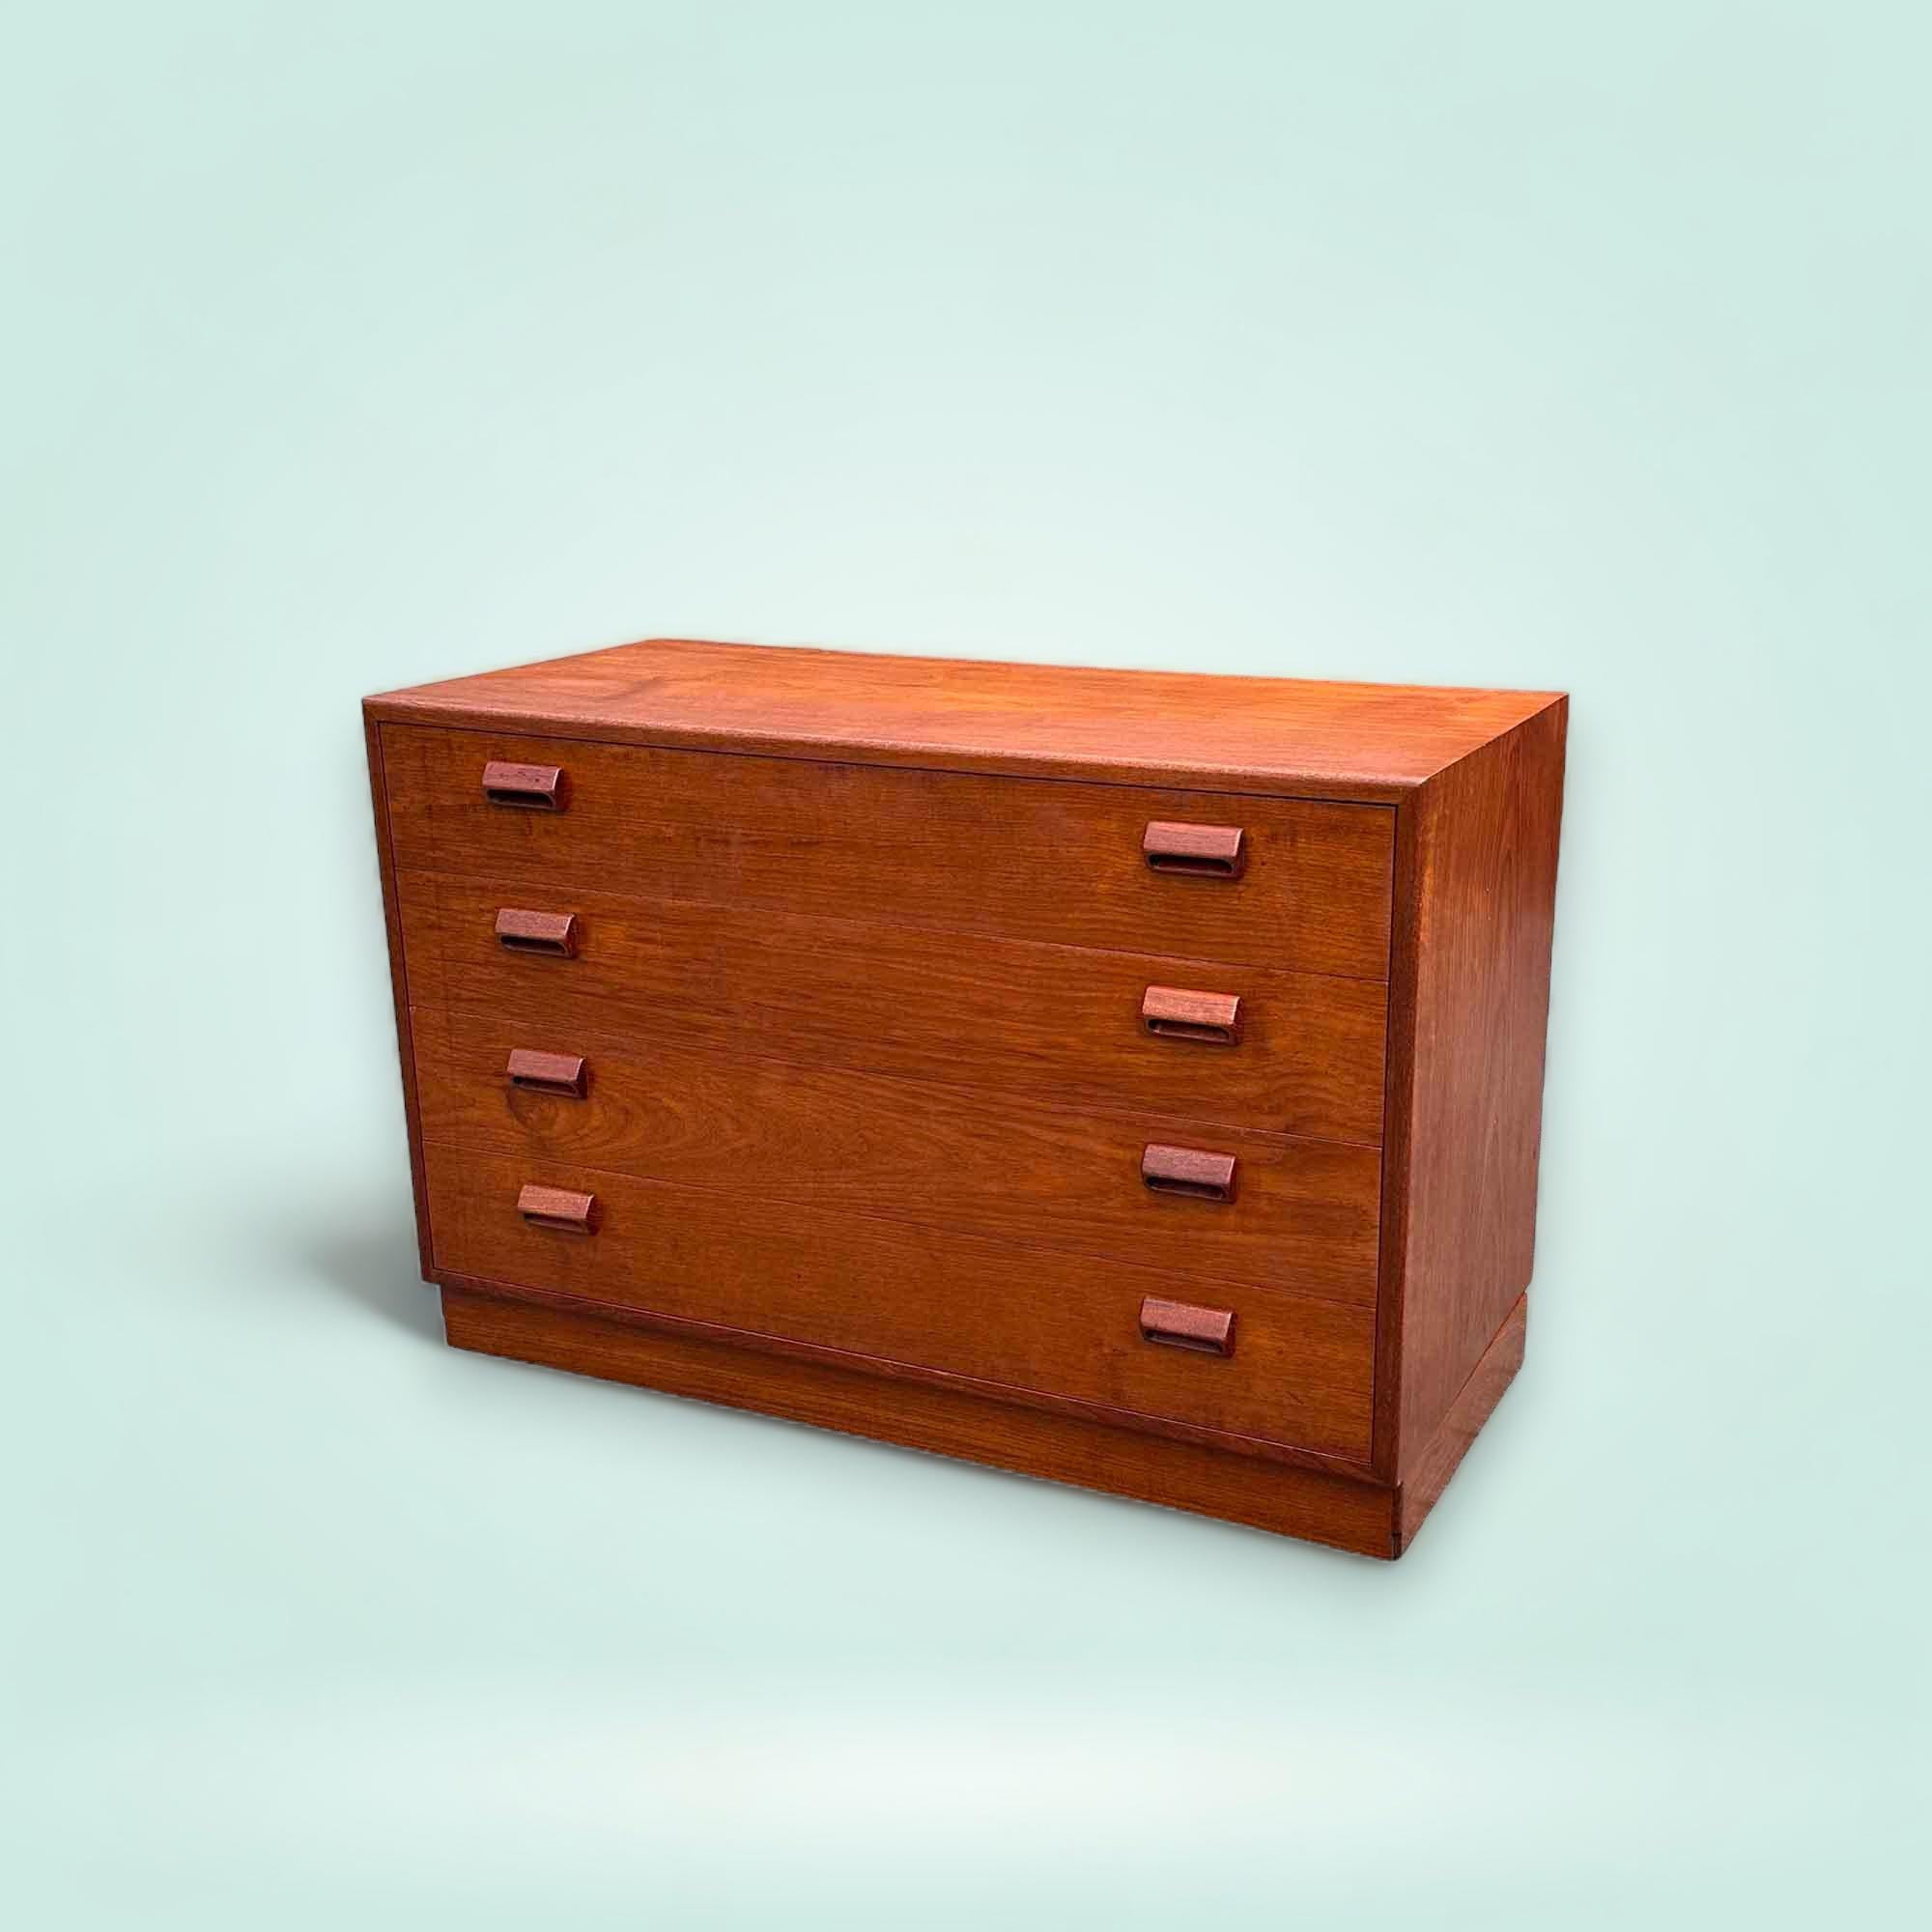 A chest of drawers in teak with 4 drawers, designed by Børge Mogensen for Søborg Møbelfabrik in the 1950s. The cabinet is in good condition and has a nice patina.

Denmark, 1950s

Designer/Manufacturer: Børge Mogensen for Søborg Møbelfabrik

The